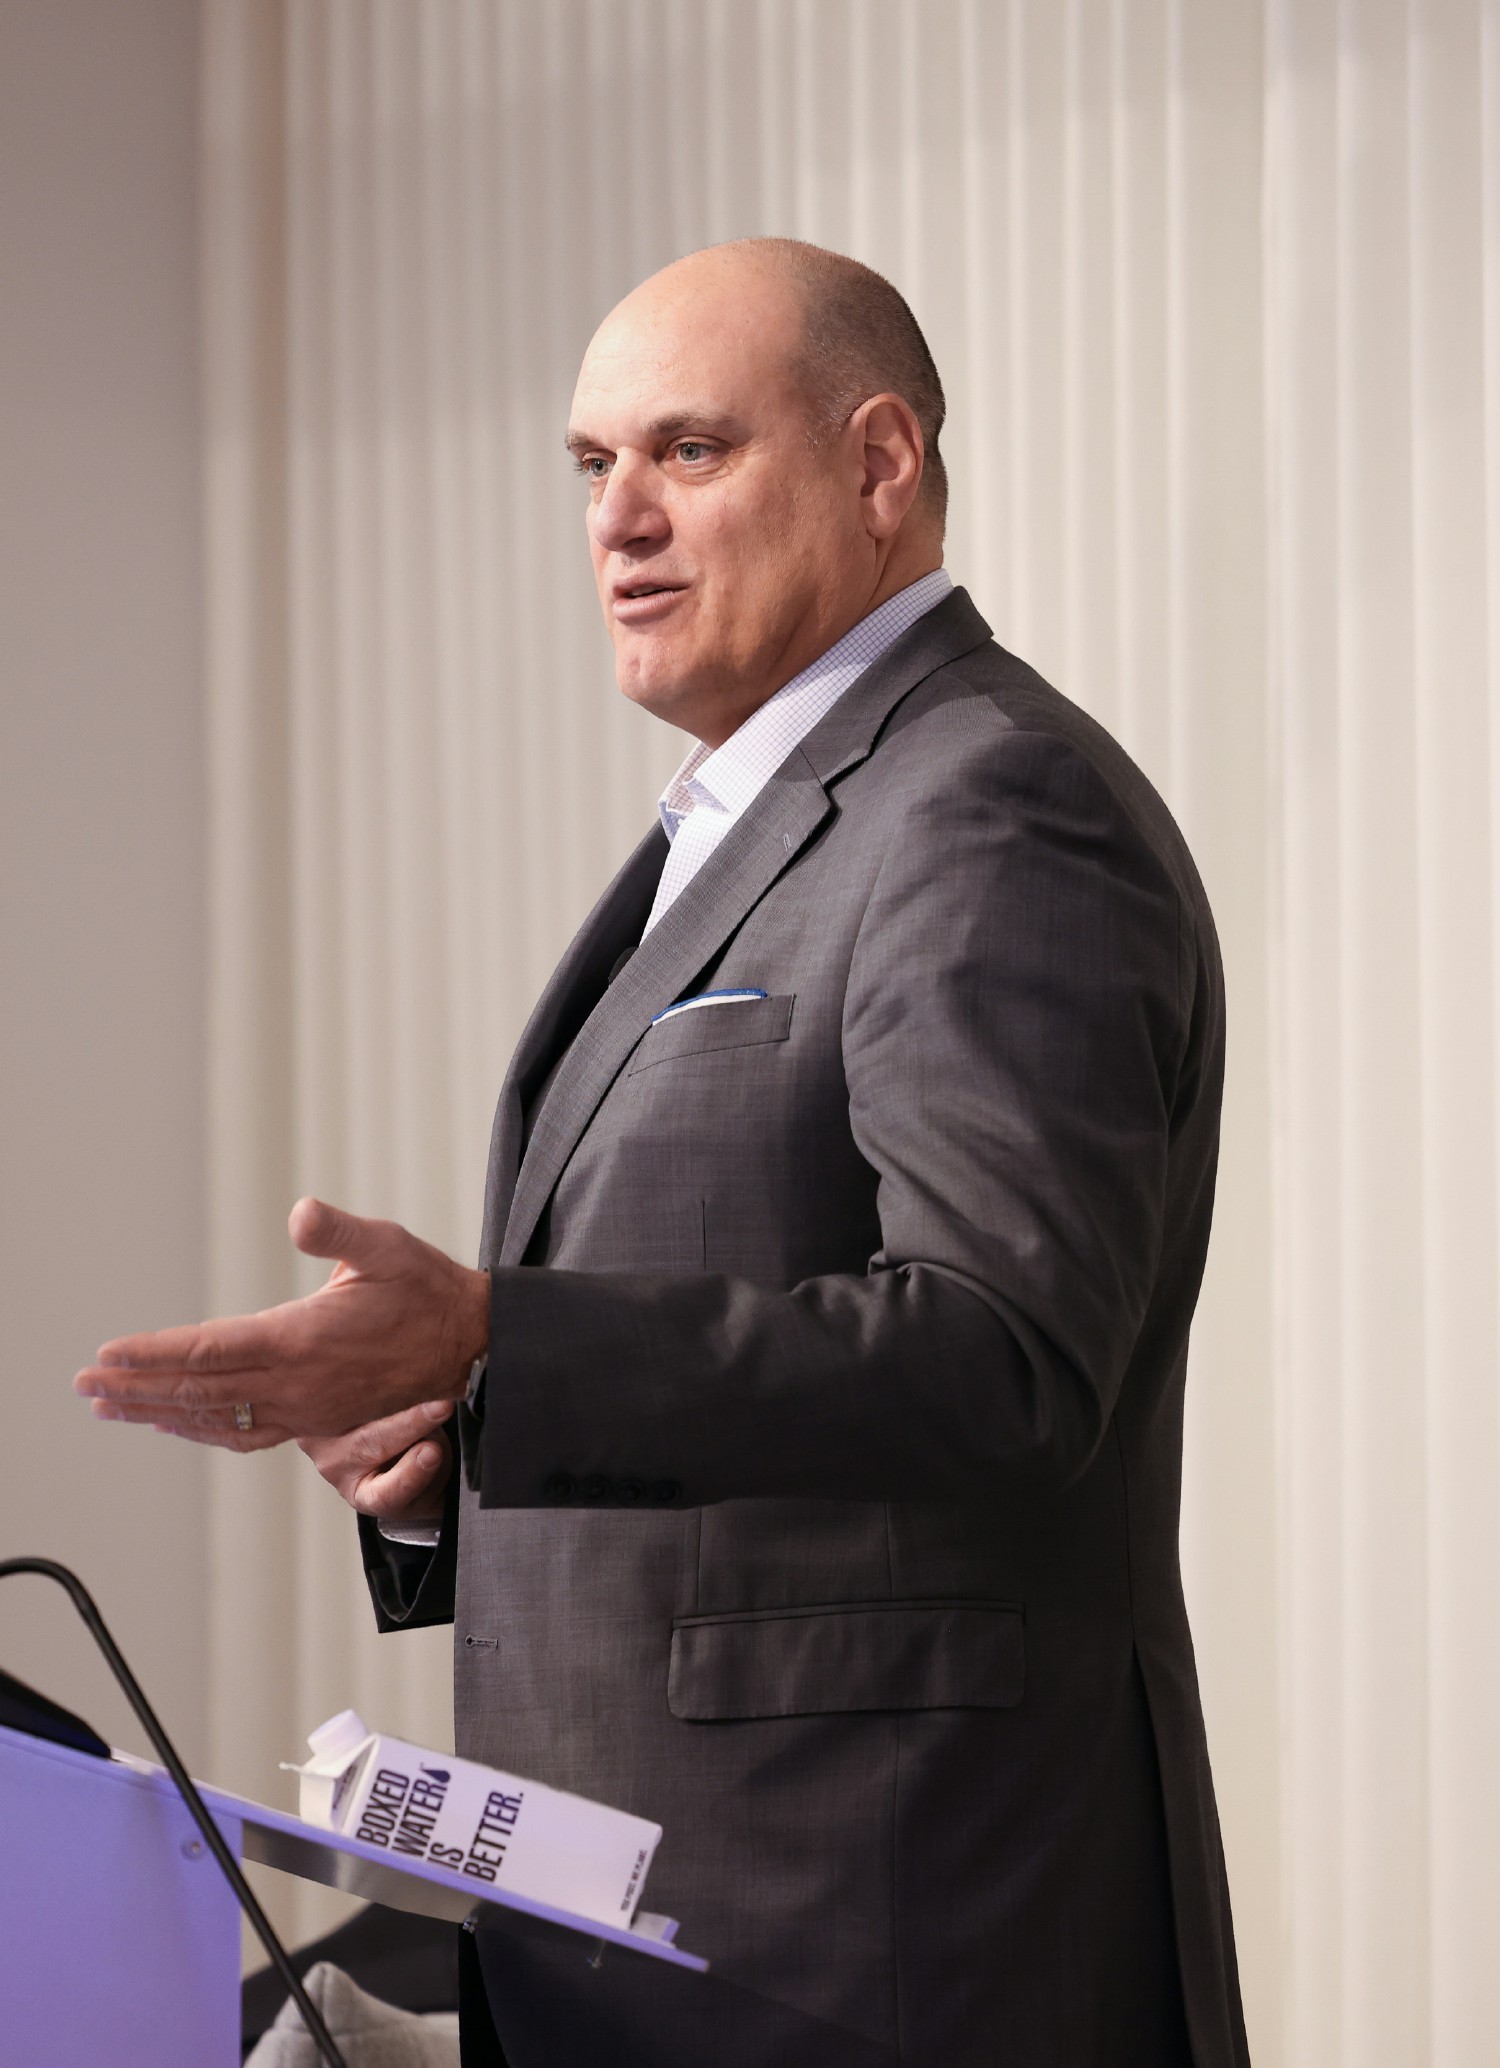 Our North America Region CEO Oscar Villalonga speaks during an all-employee meeting.